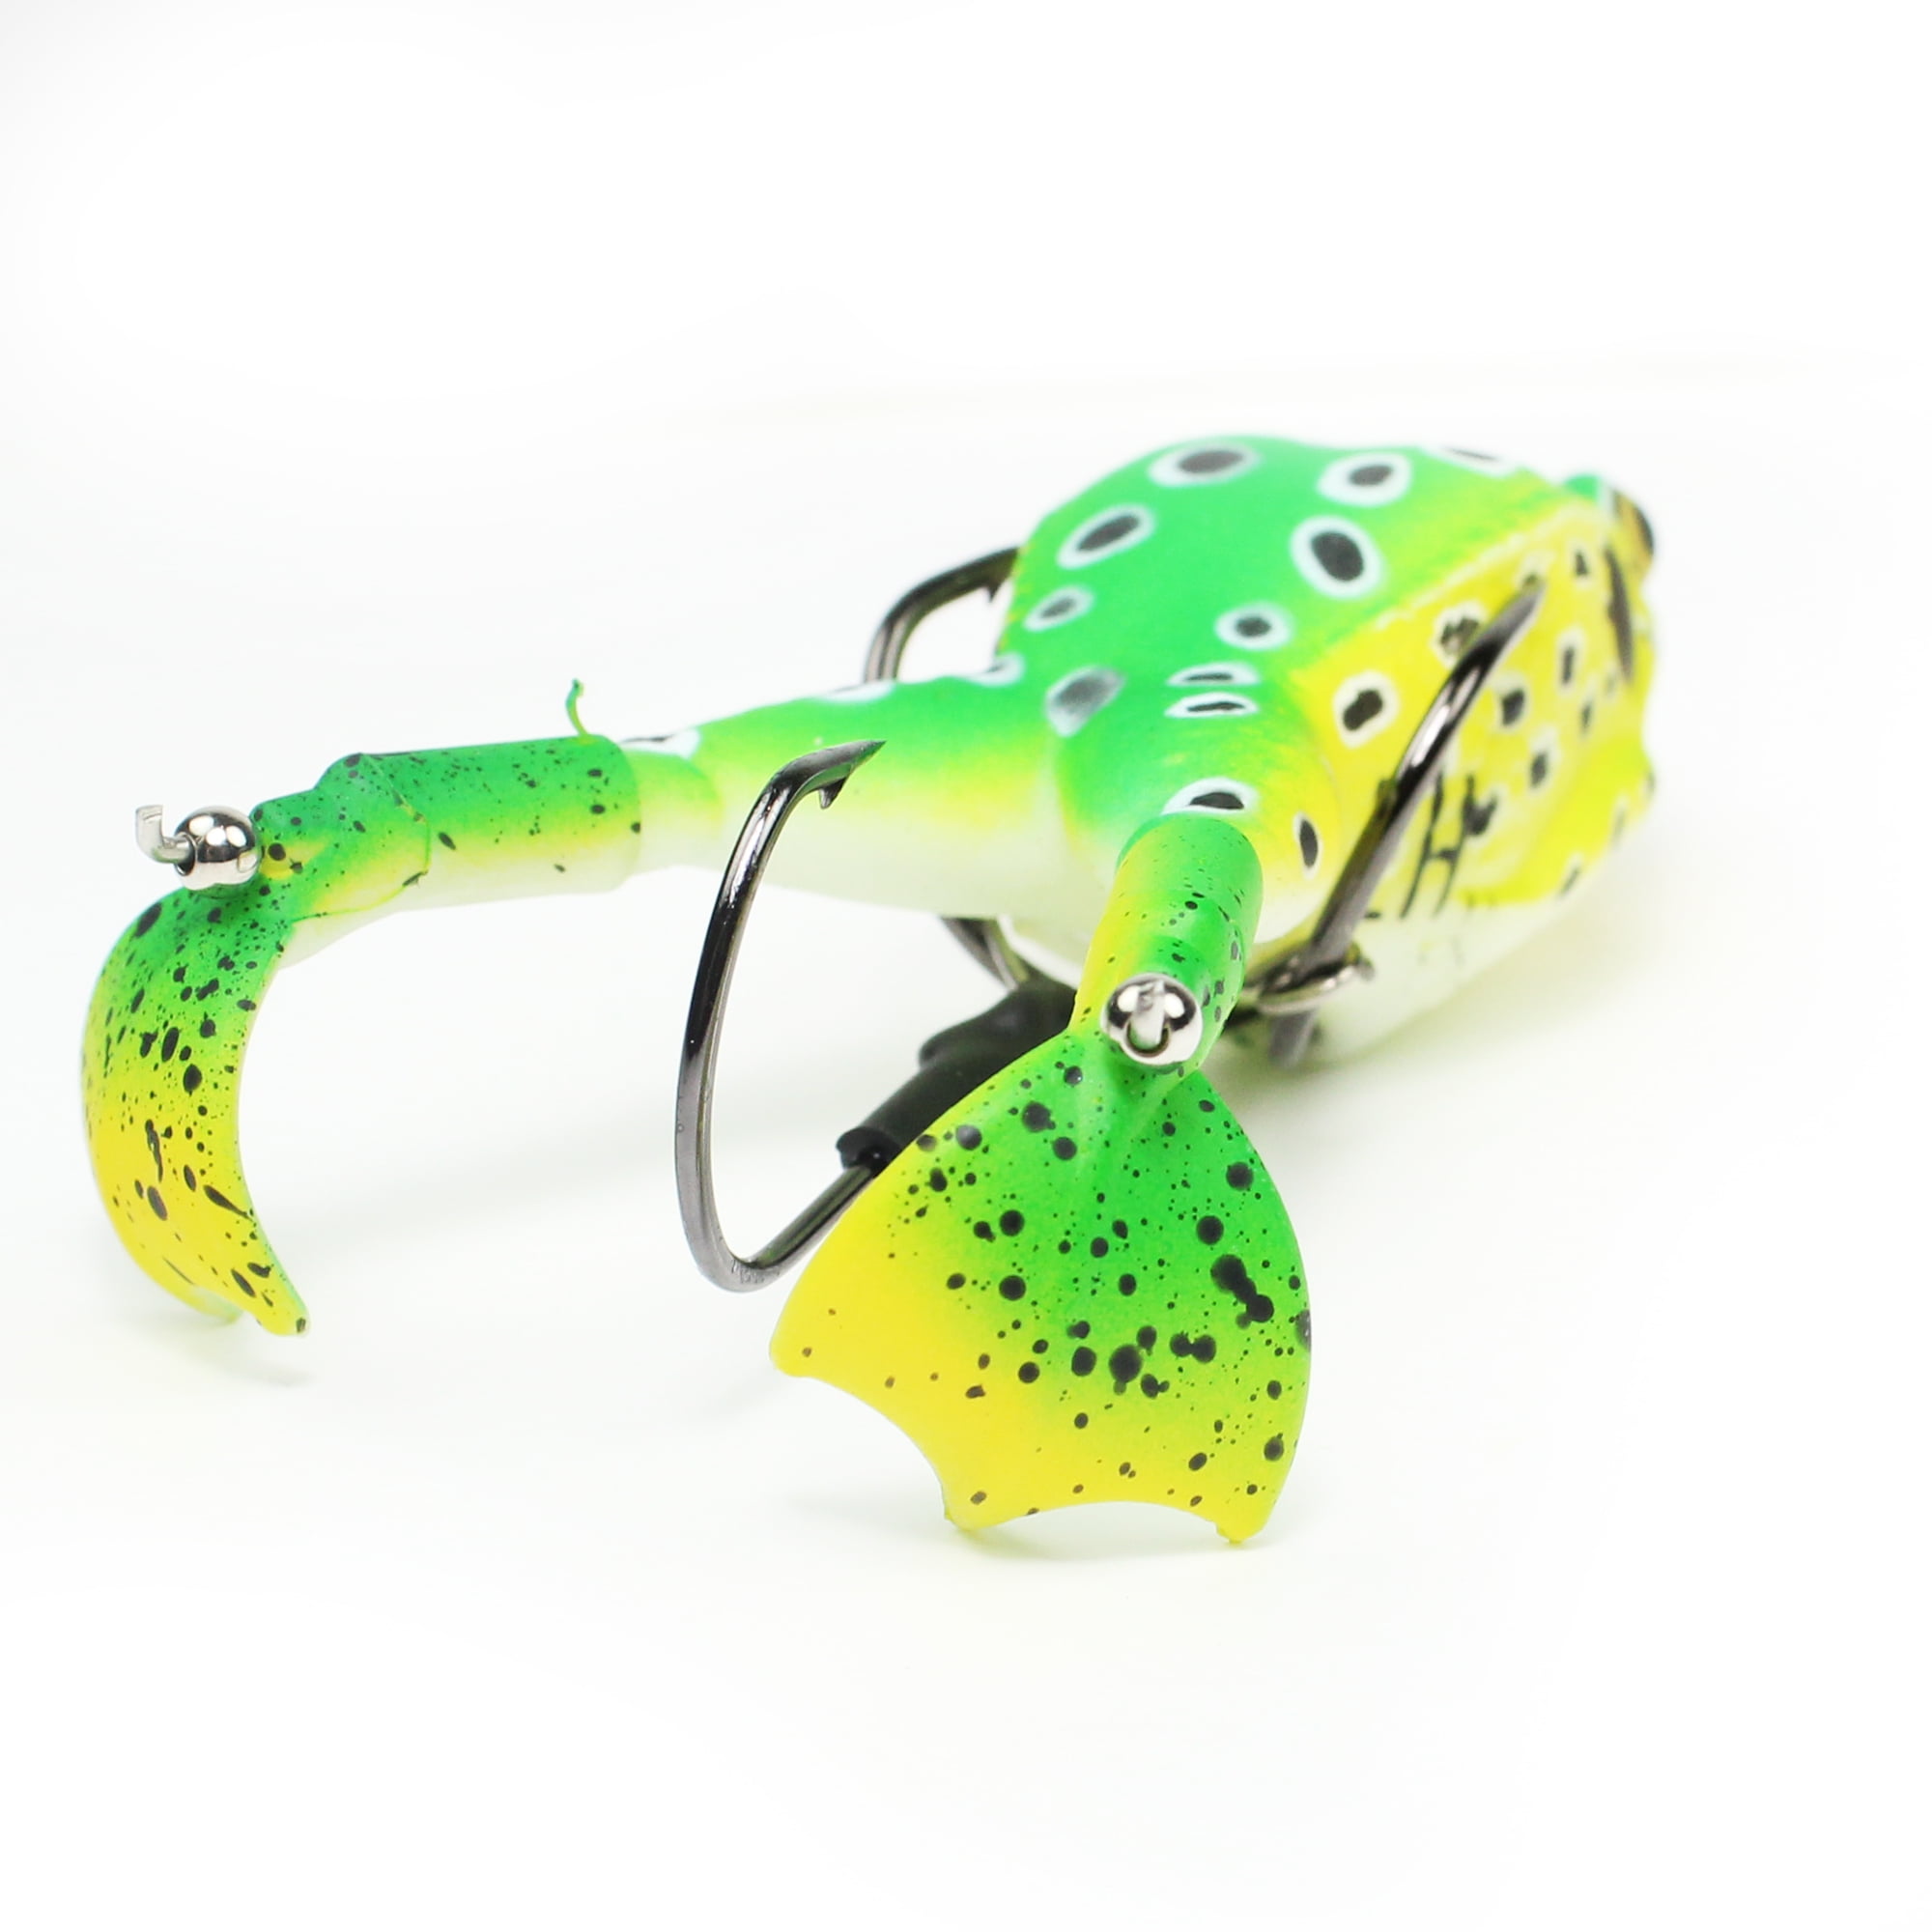 Lunkerhunt Prop Frog - Topwater Lure - Leopard,3.5in,1/2oz,Soft Baits,Fishing  Lures 